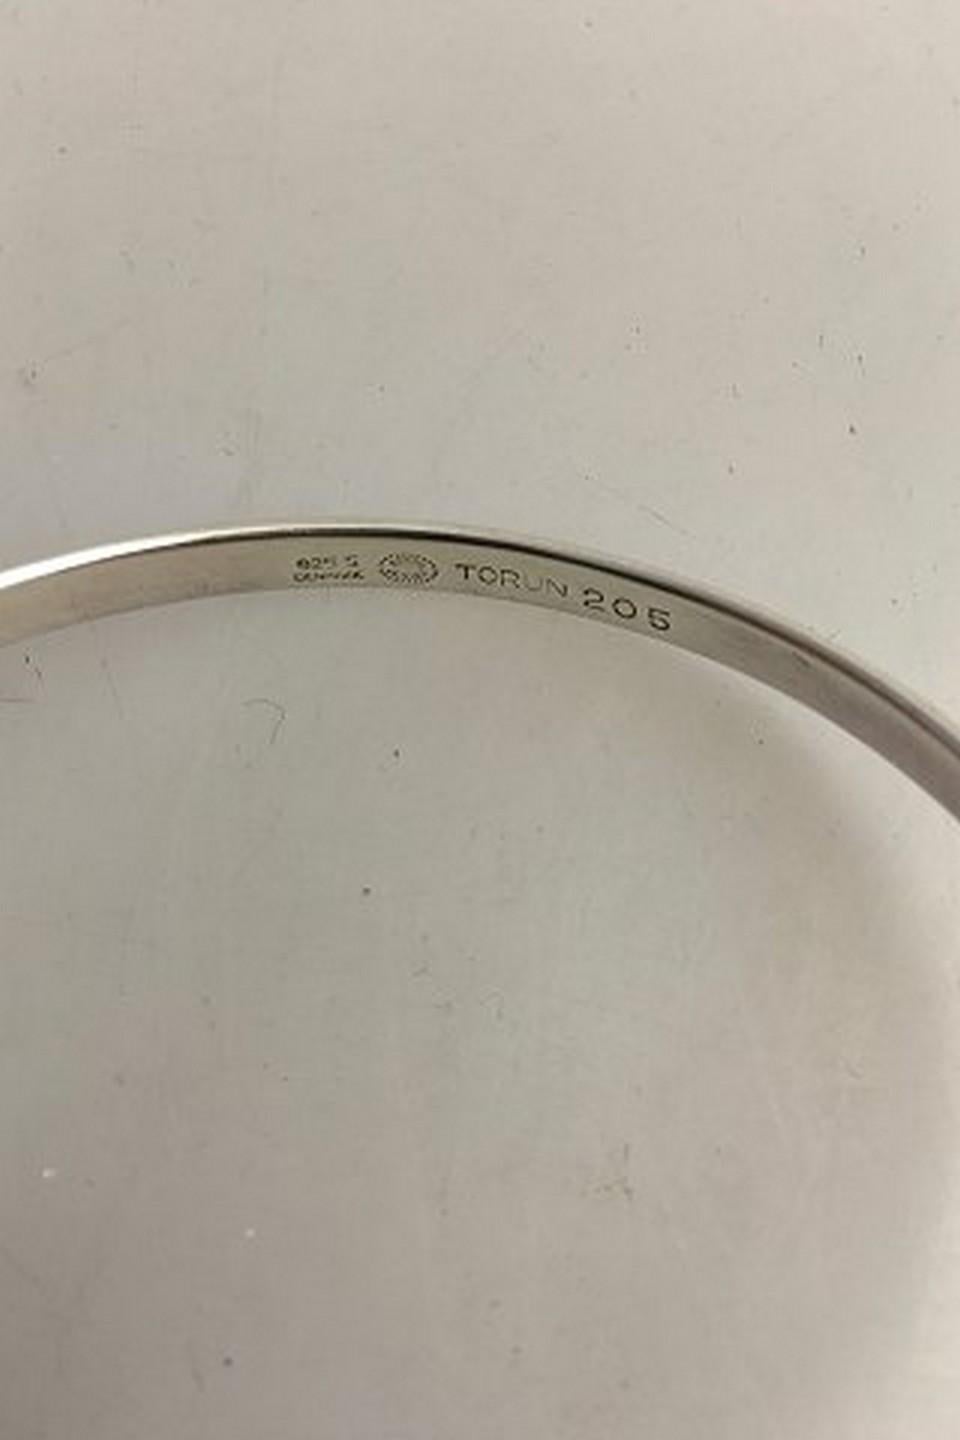 Georg Jensen Sterling Silver Torun Armring No 205 with Pendant No 303. From after 1945.
Measures 7.5 cm / 2 61/64 in. x 6 cm / 2 23/64 in. dia. Weighs 20 g / 0.75 oz. Pendant is 3.5 cm / 1 3/8 in.